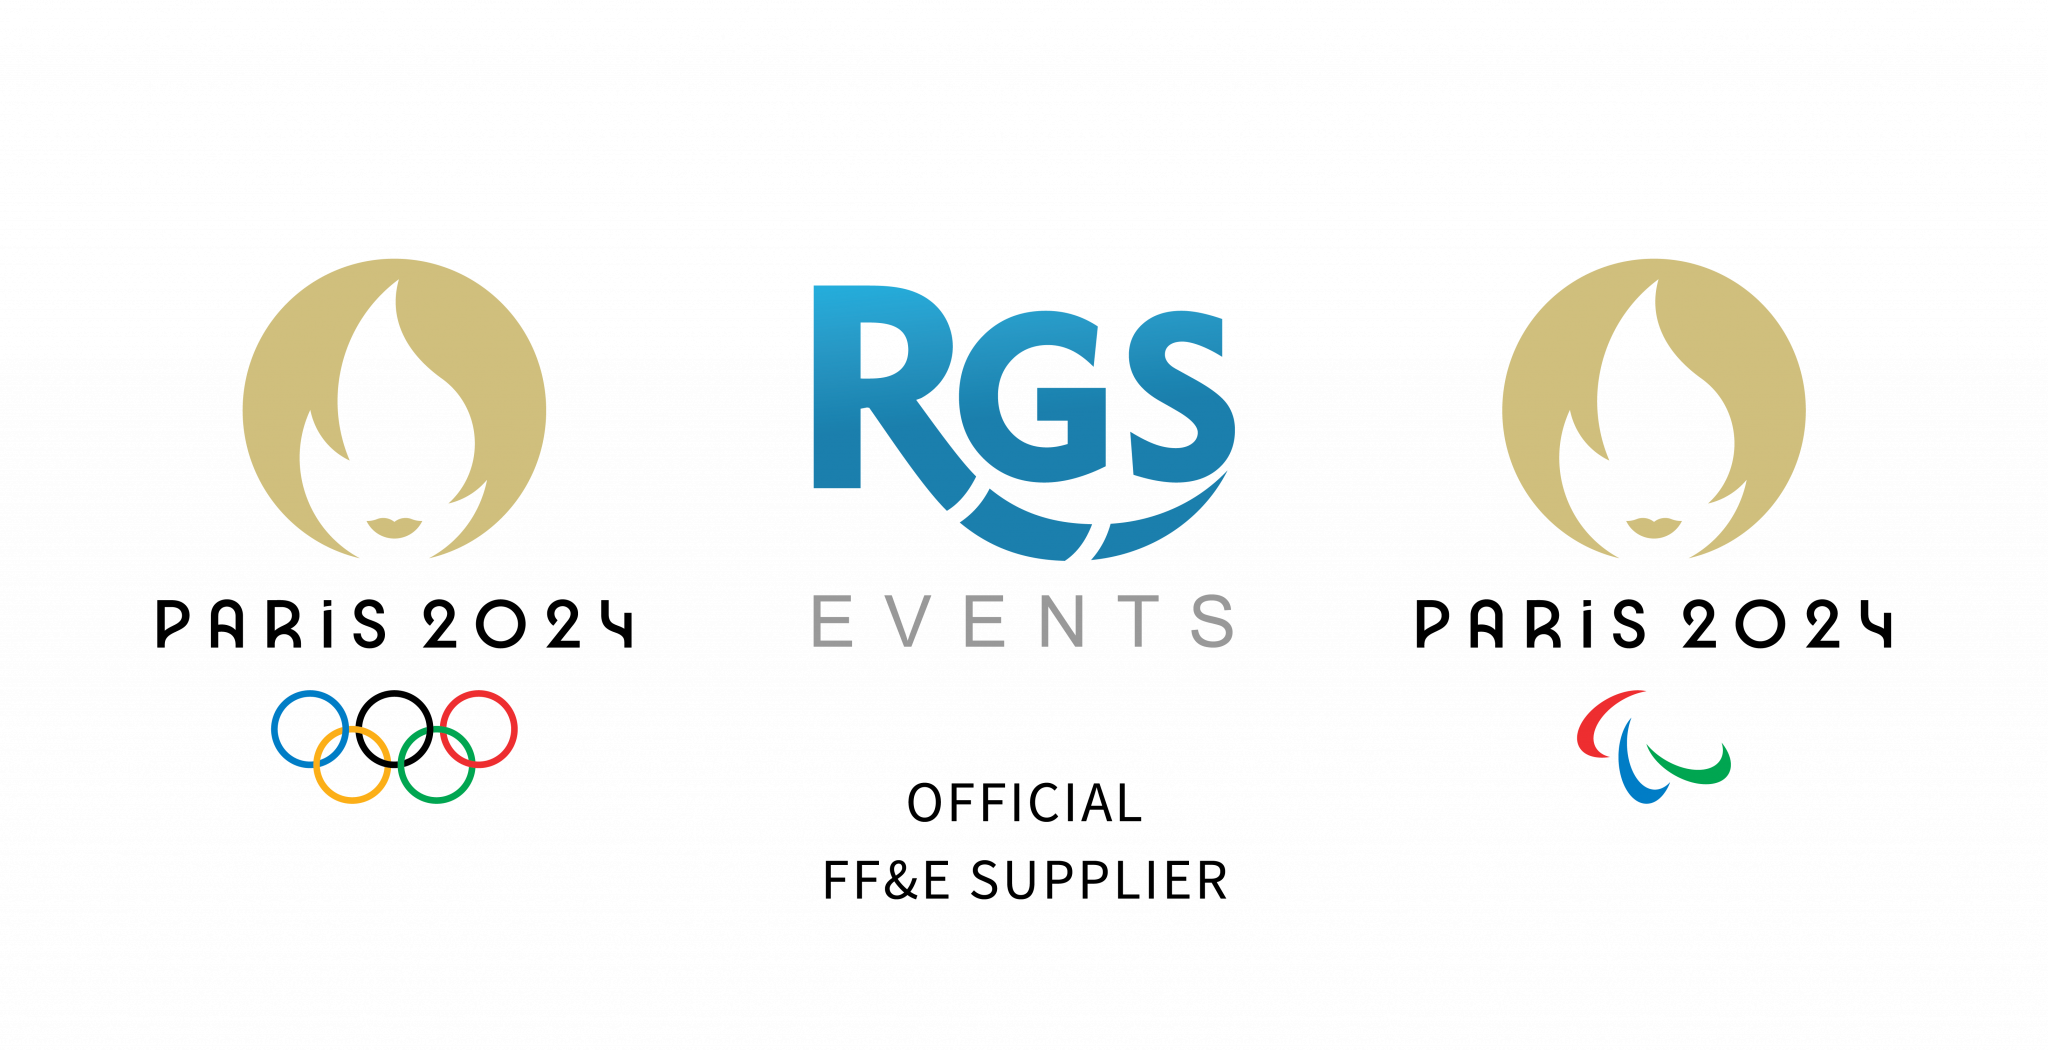 RGS Events has been appointed as official furniture, fixtures and equipment supplier for Paris 2024 ©RGS Events